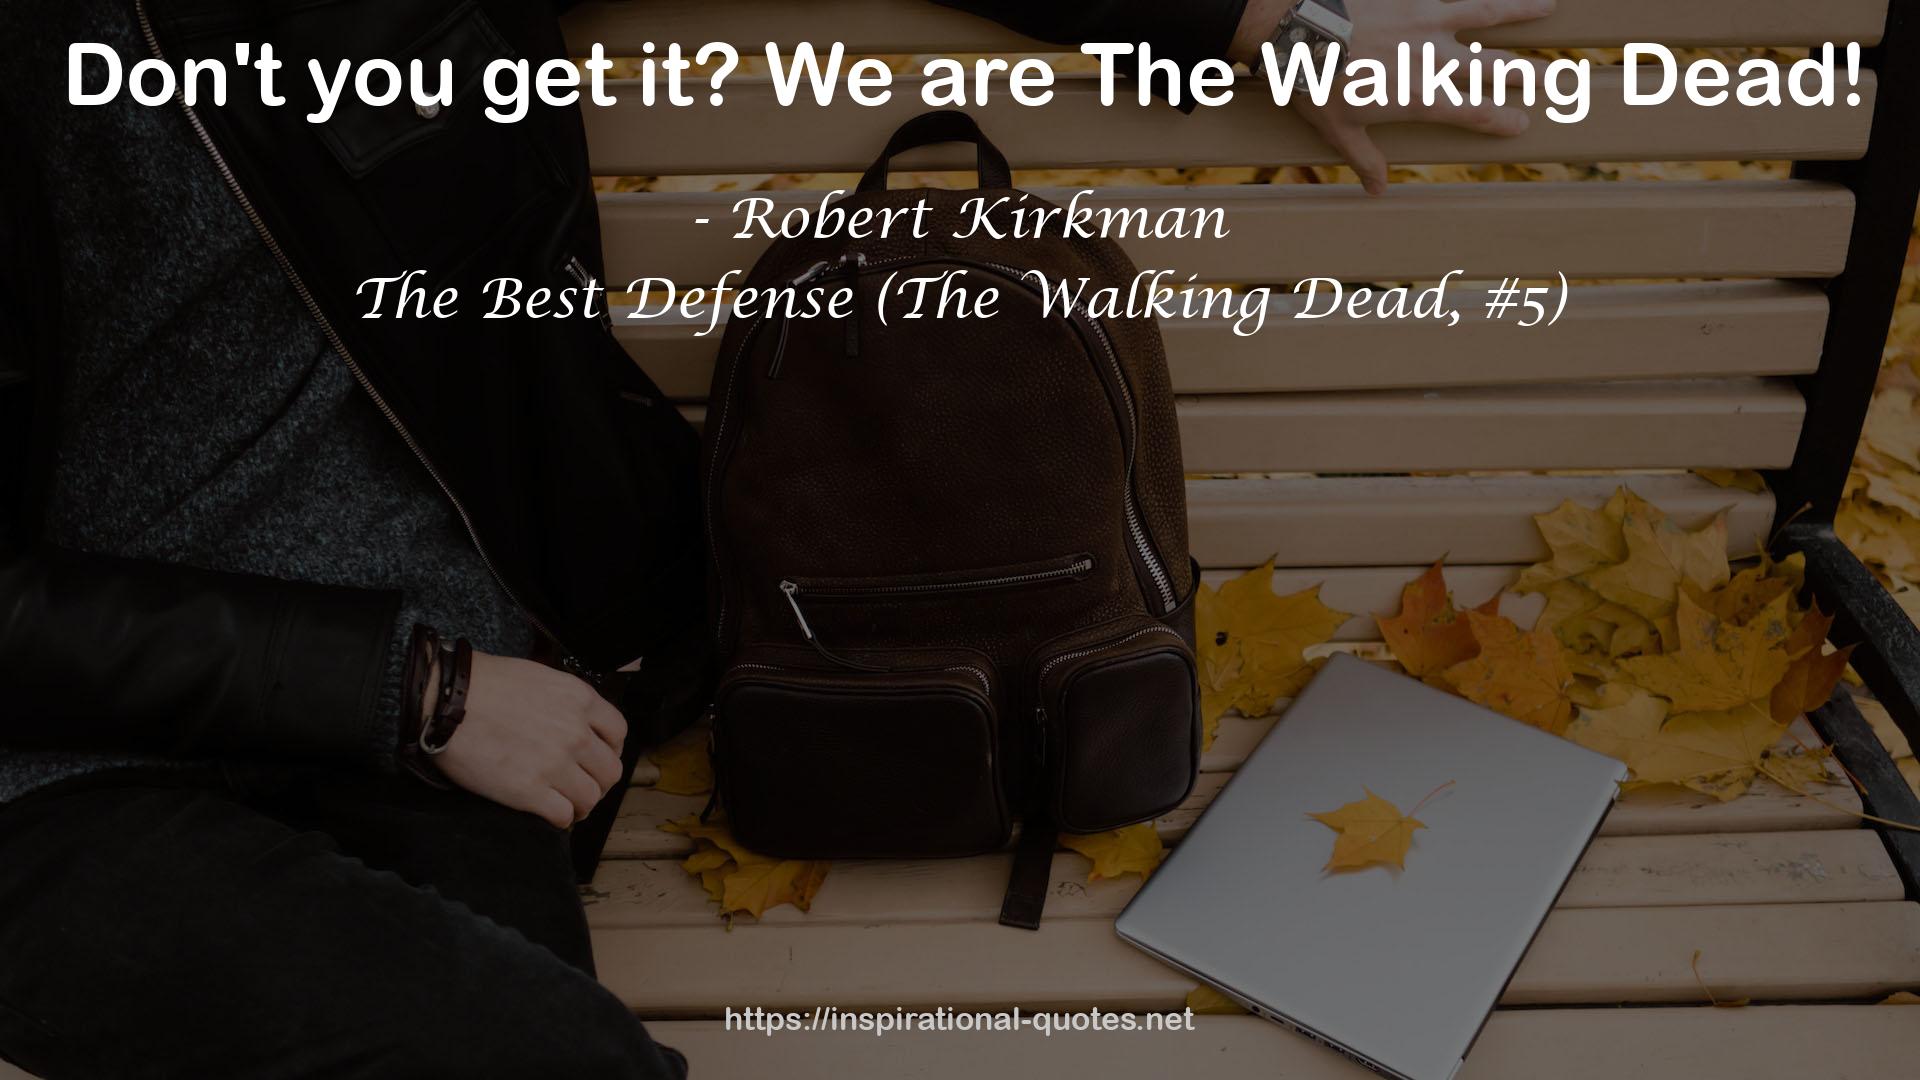 The Best Defense (The Walking Dead, #5) QUOTES